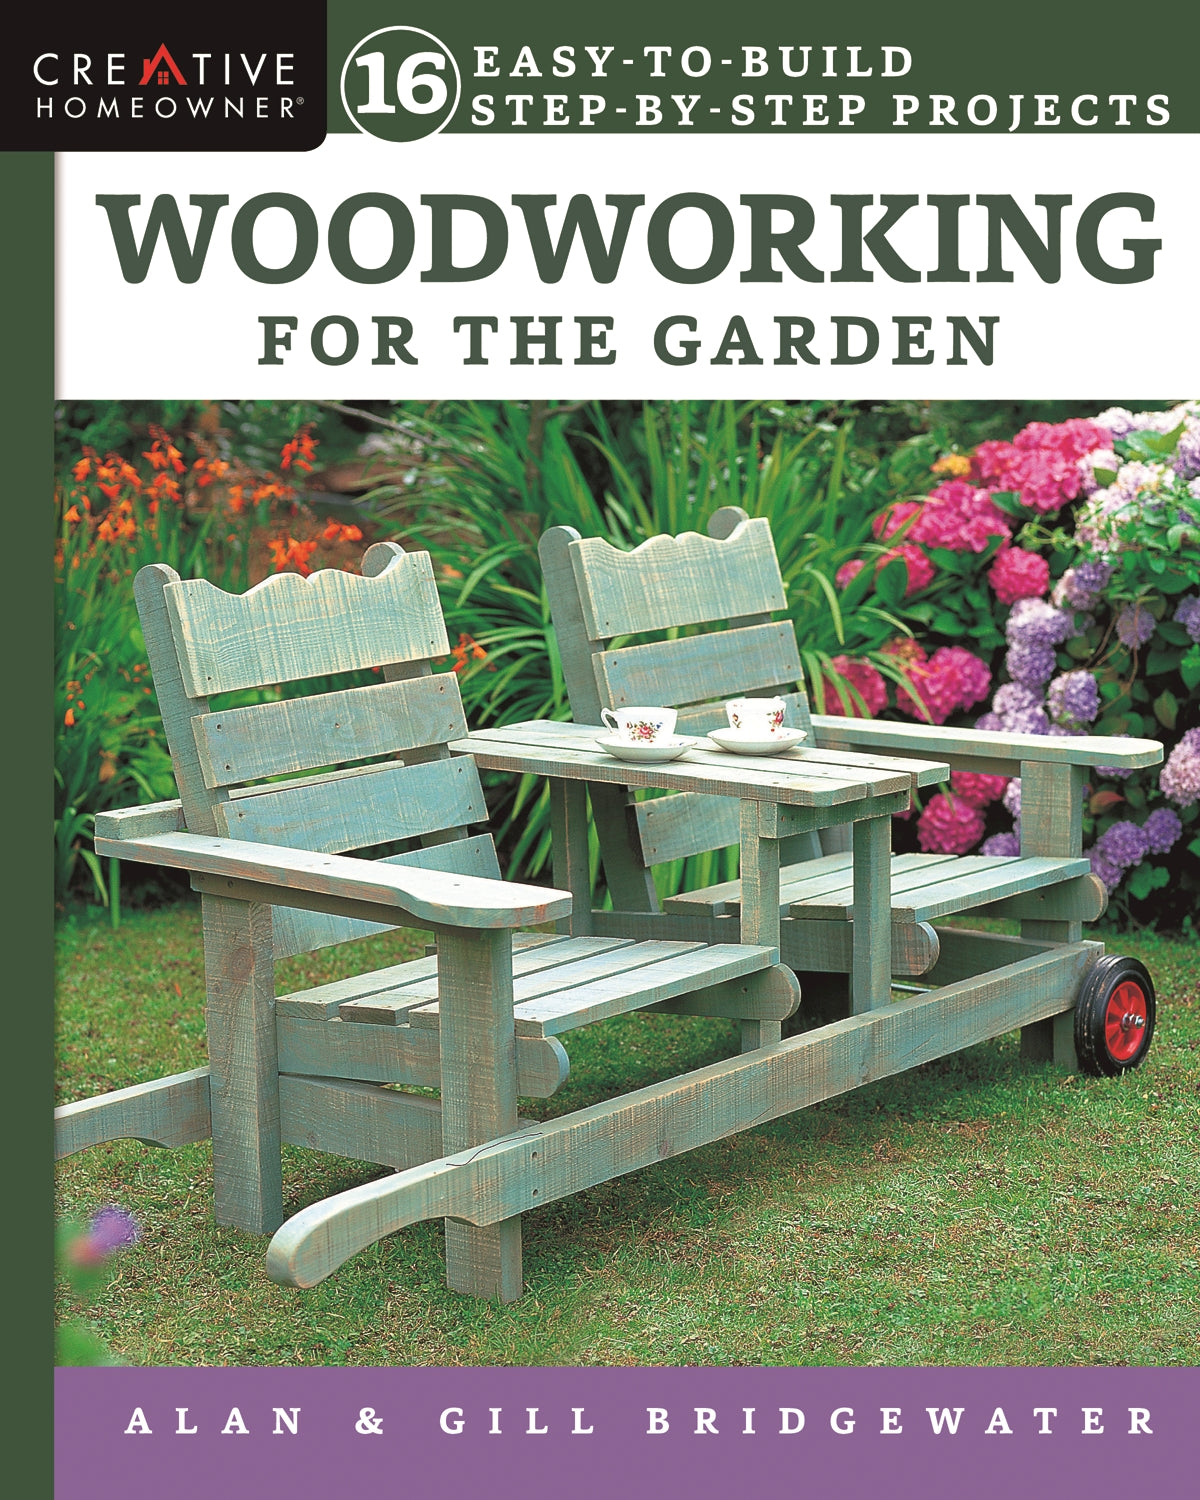 Outdoor Summer Projects Bundle